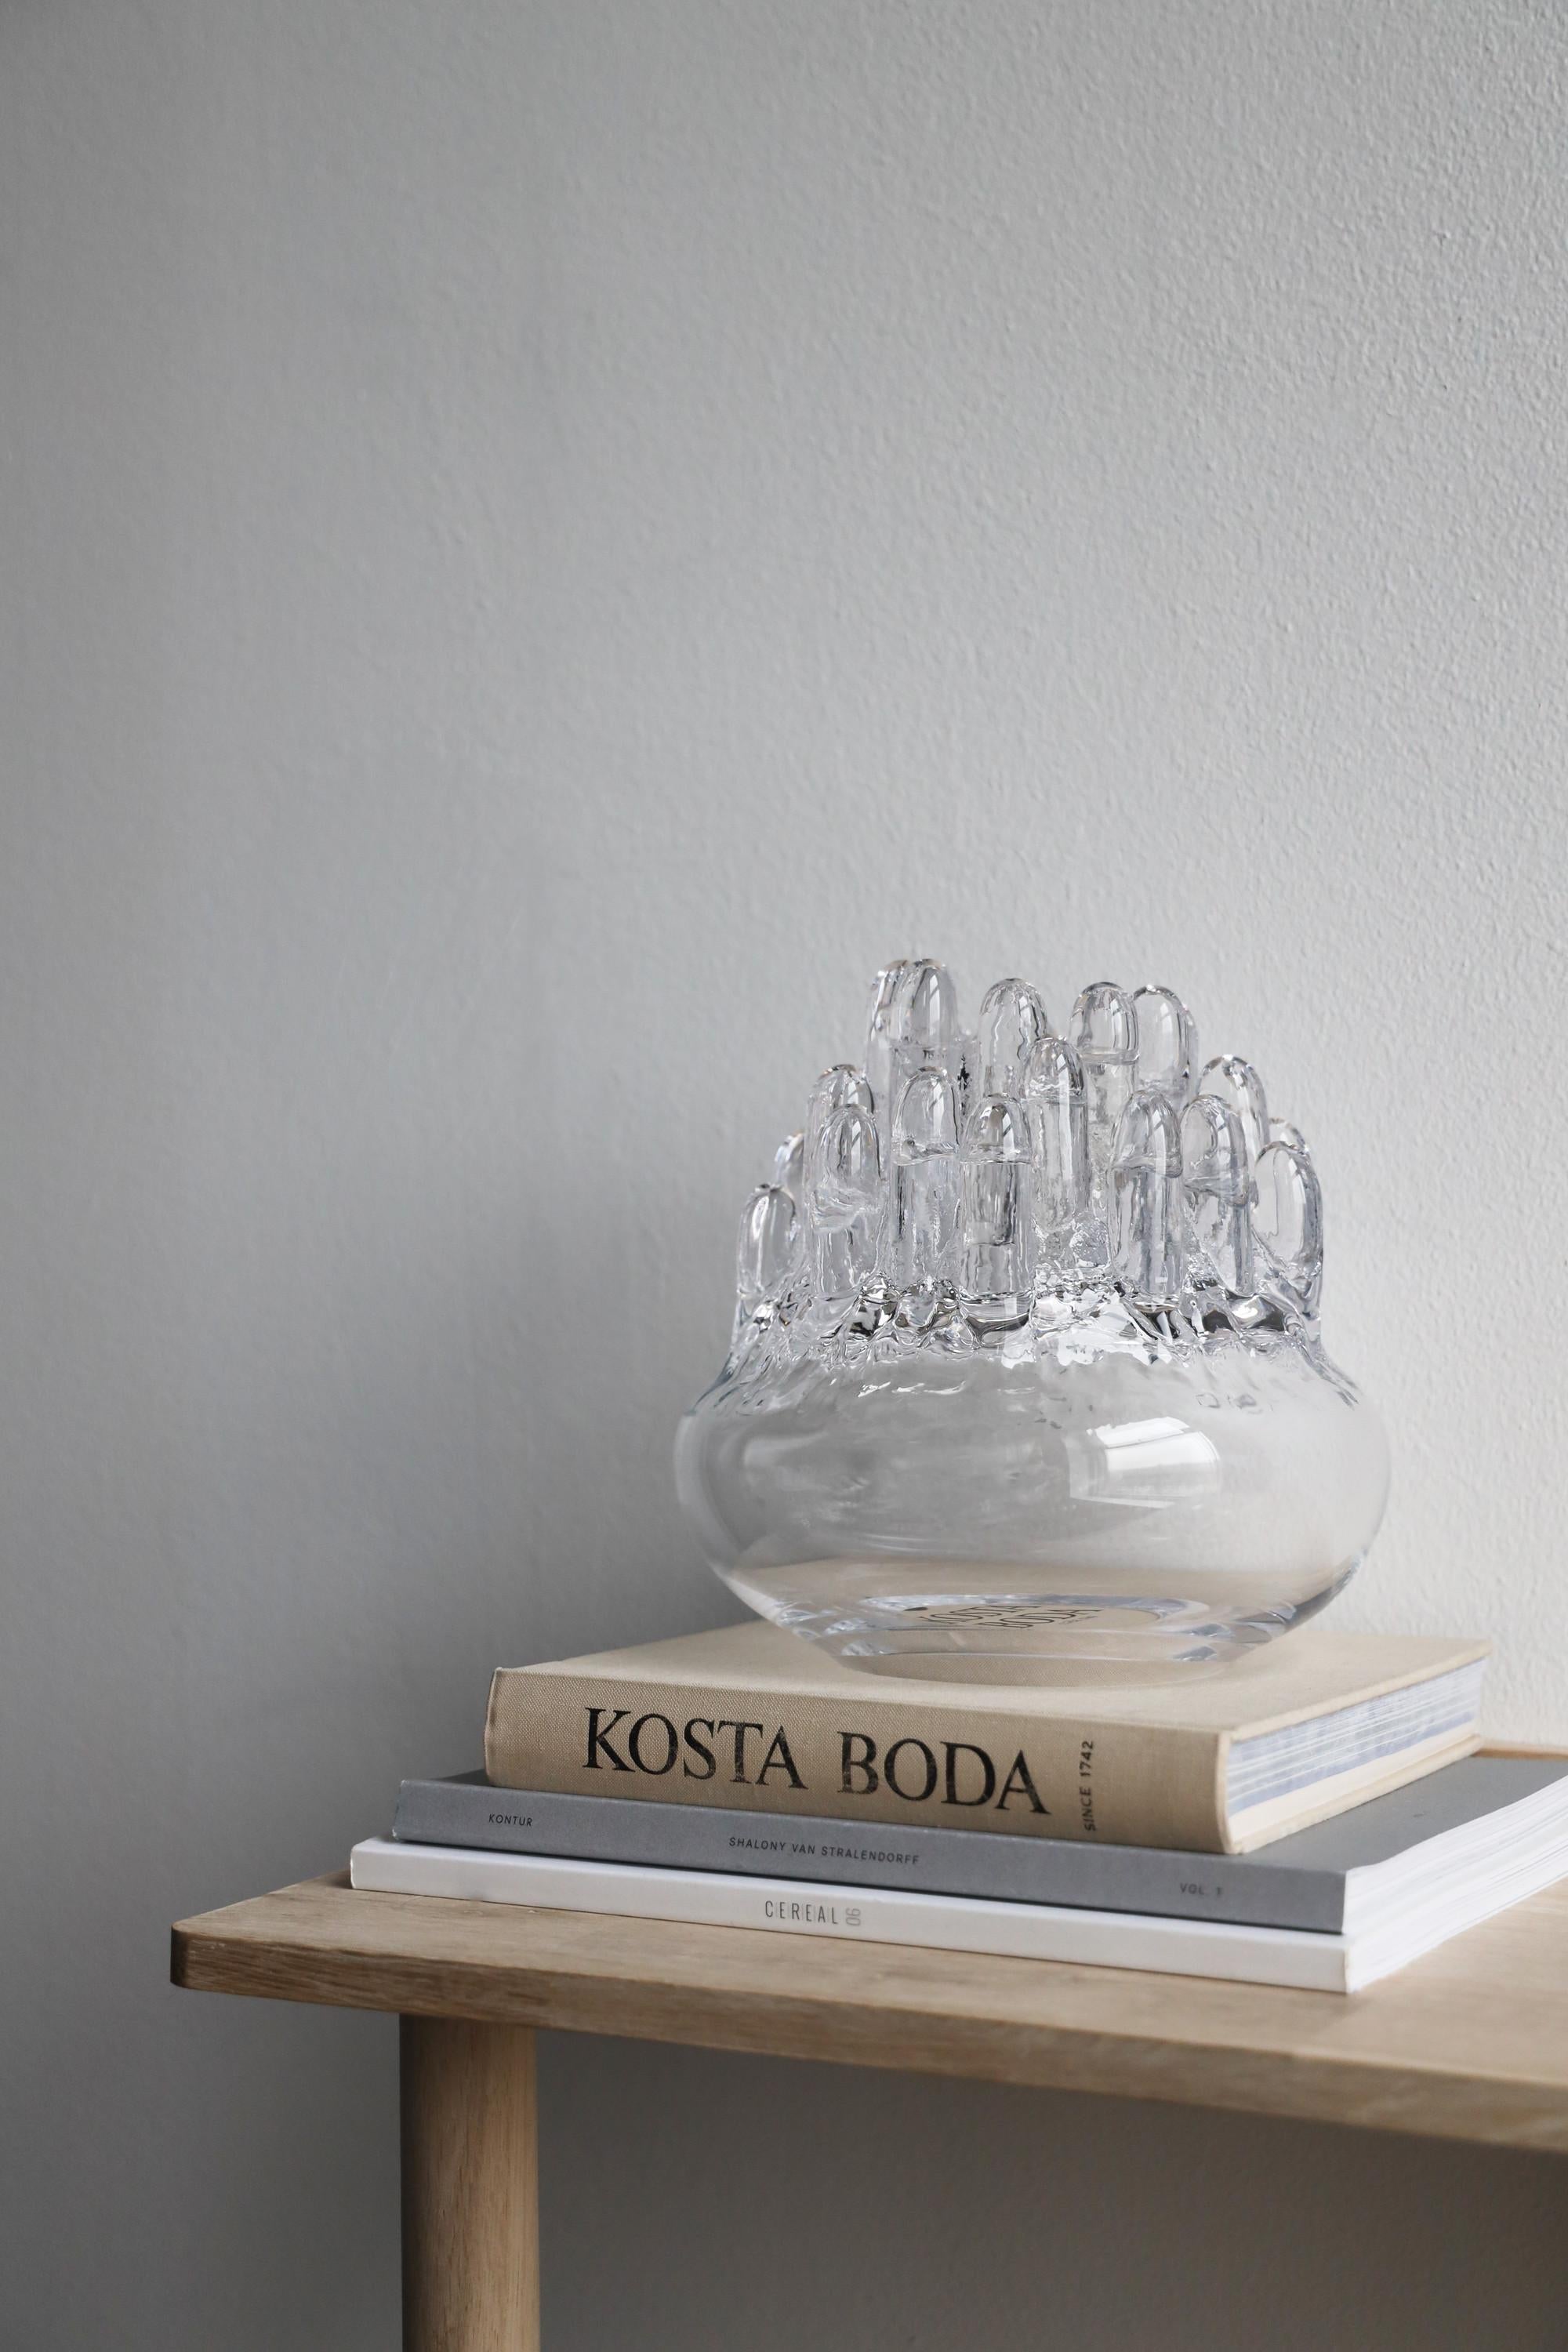 Made as a unique gift from Sweden to the Sydney Opera House (True Story), Polar from Kosta Boda was born from a love of light, nature, and ice. It's a votive candle holder, but it's also a glass sculpture and a beautiful design object. This iconic